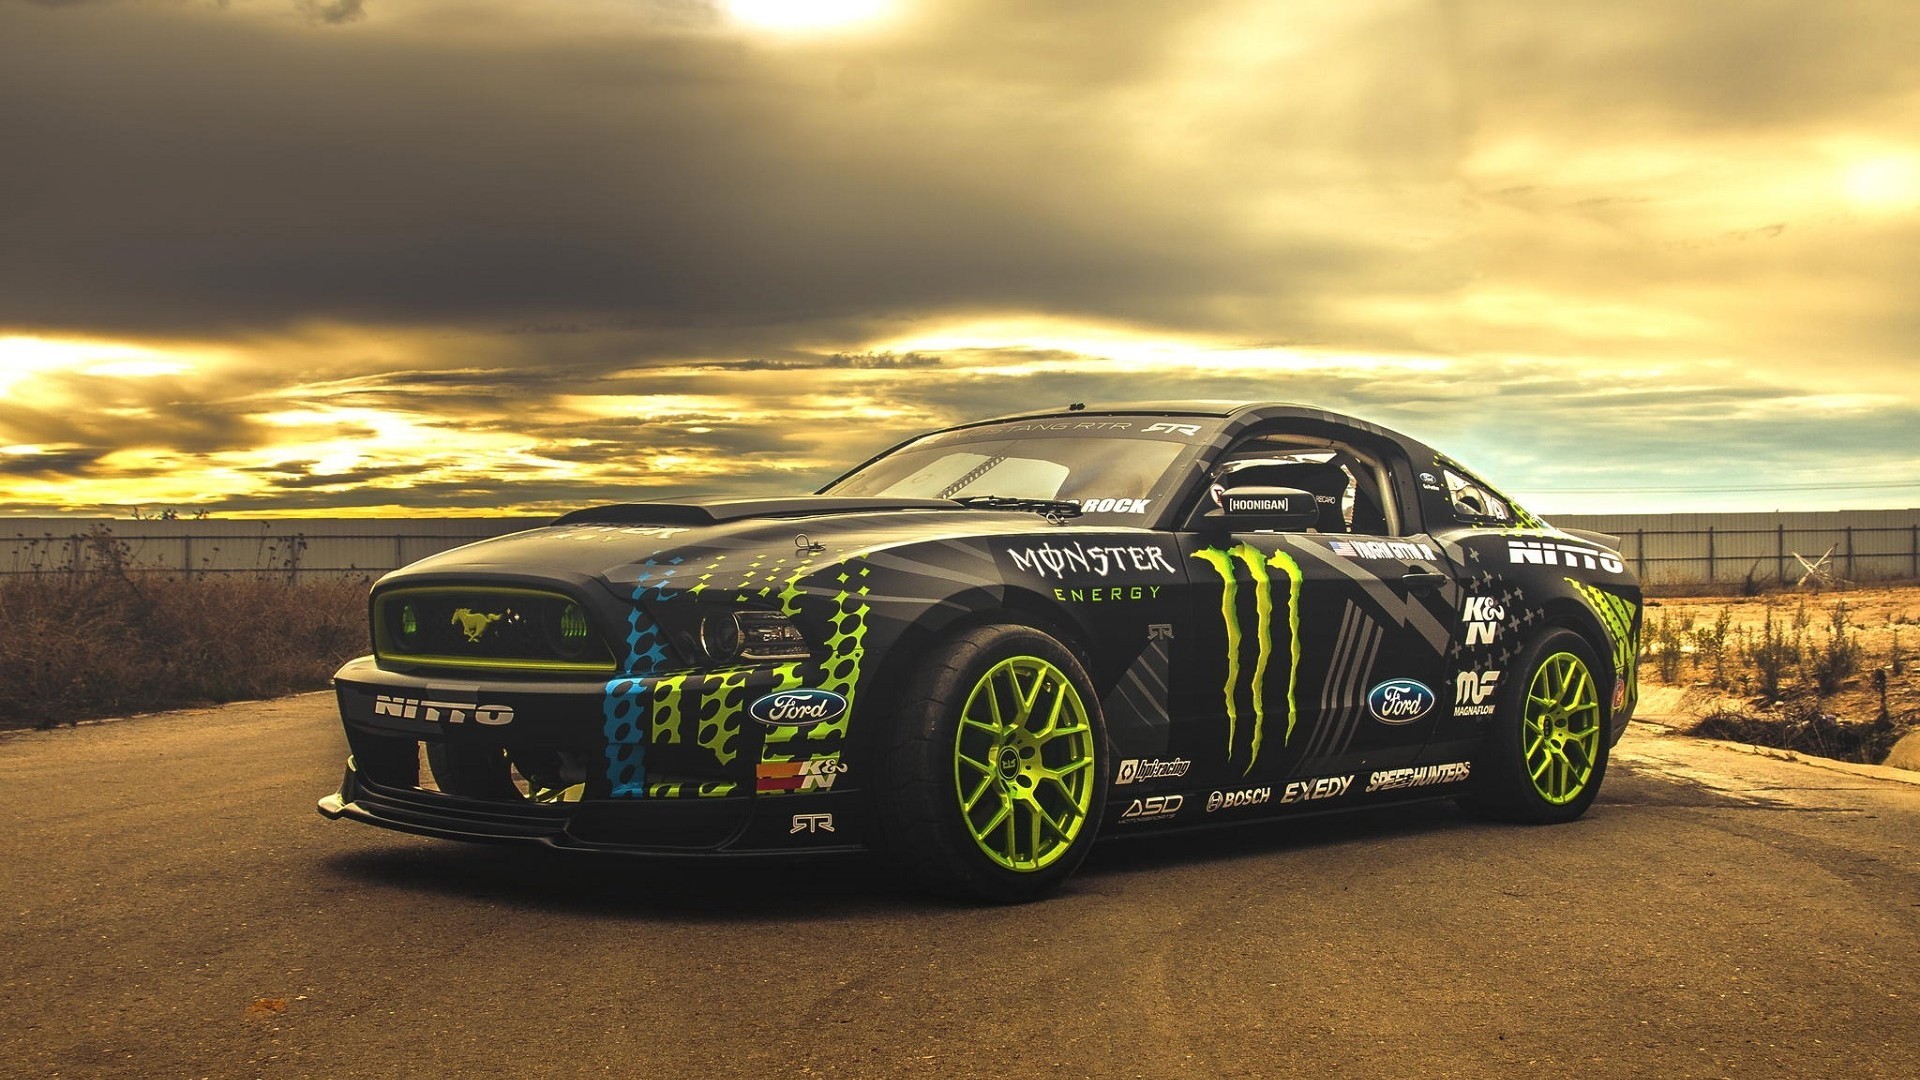 General 1920x1080 Ford Mustang hoonigan Monster Energy colored wheels Ford car vehicle black cars Ford Mustang S-197 II livery muscle cars American cars